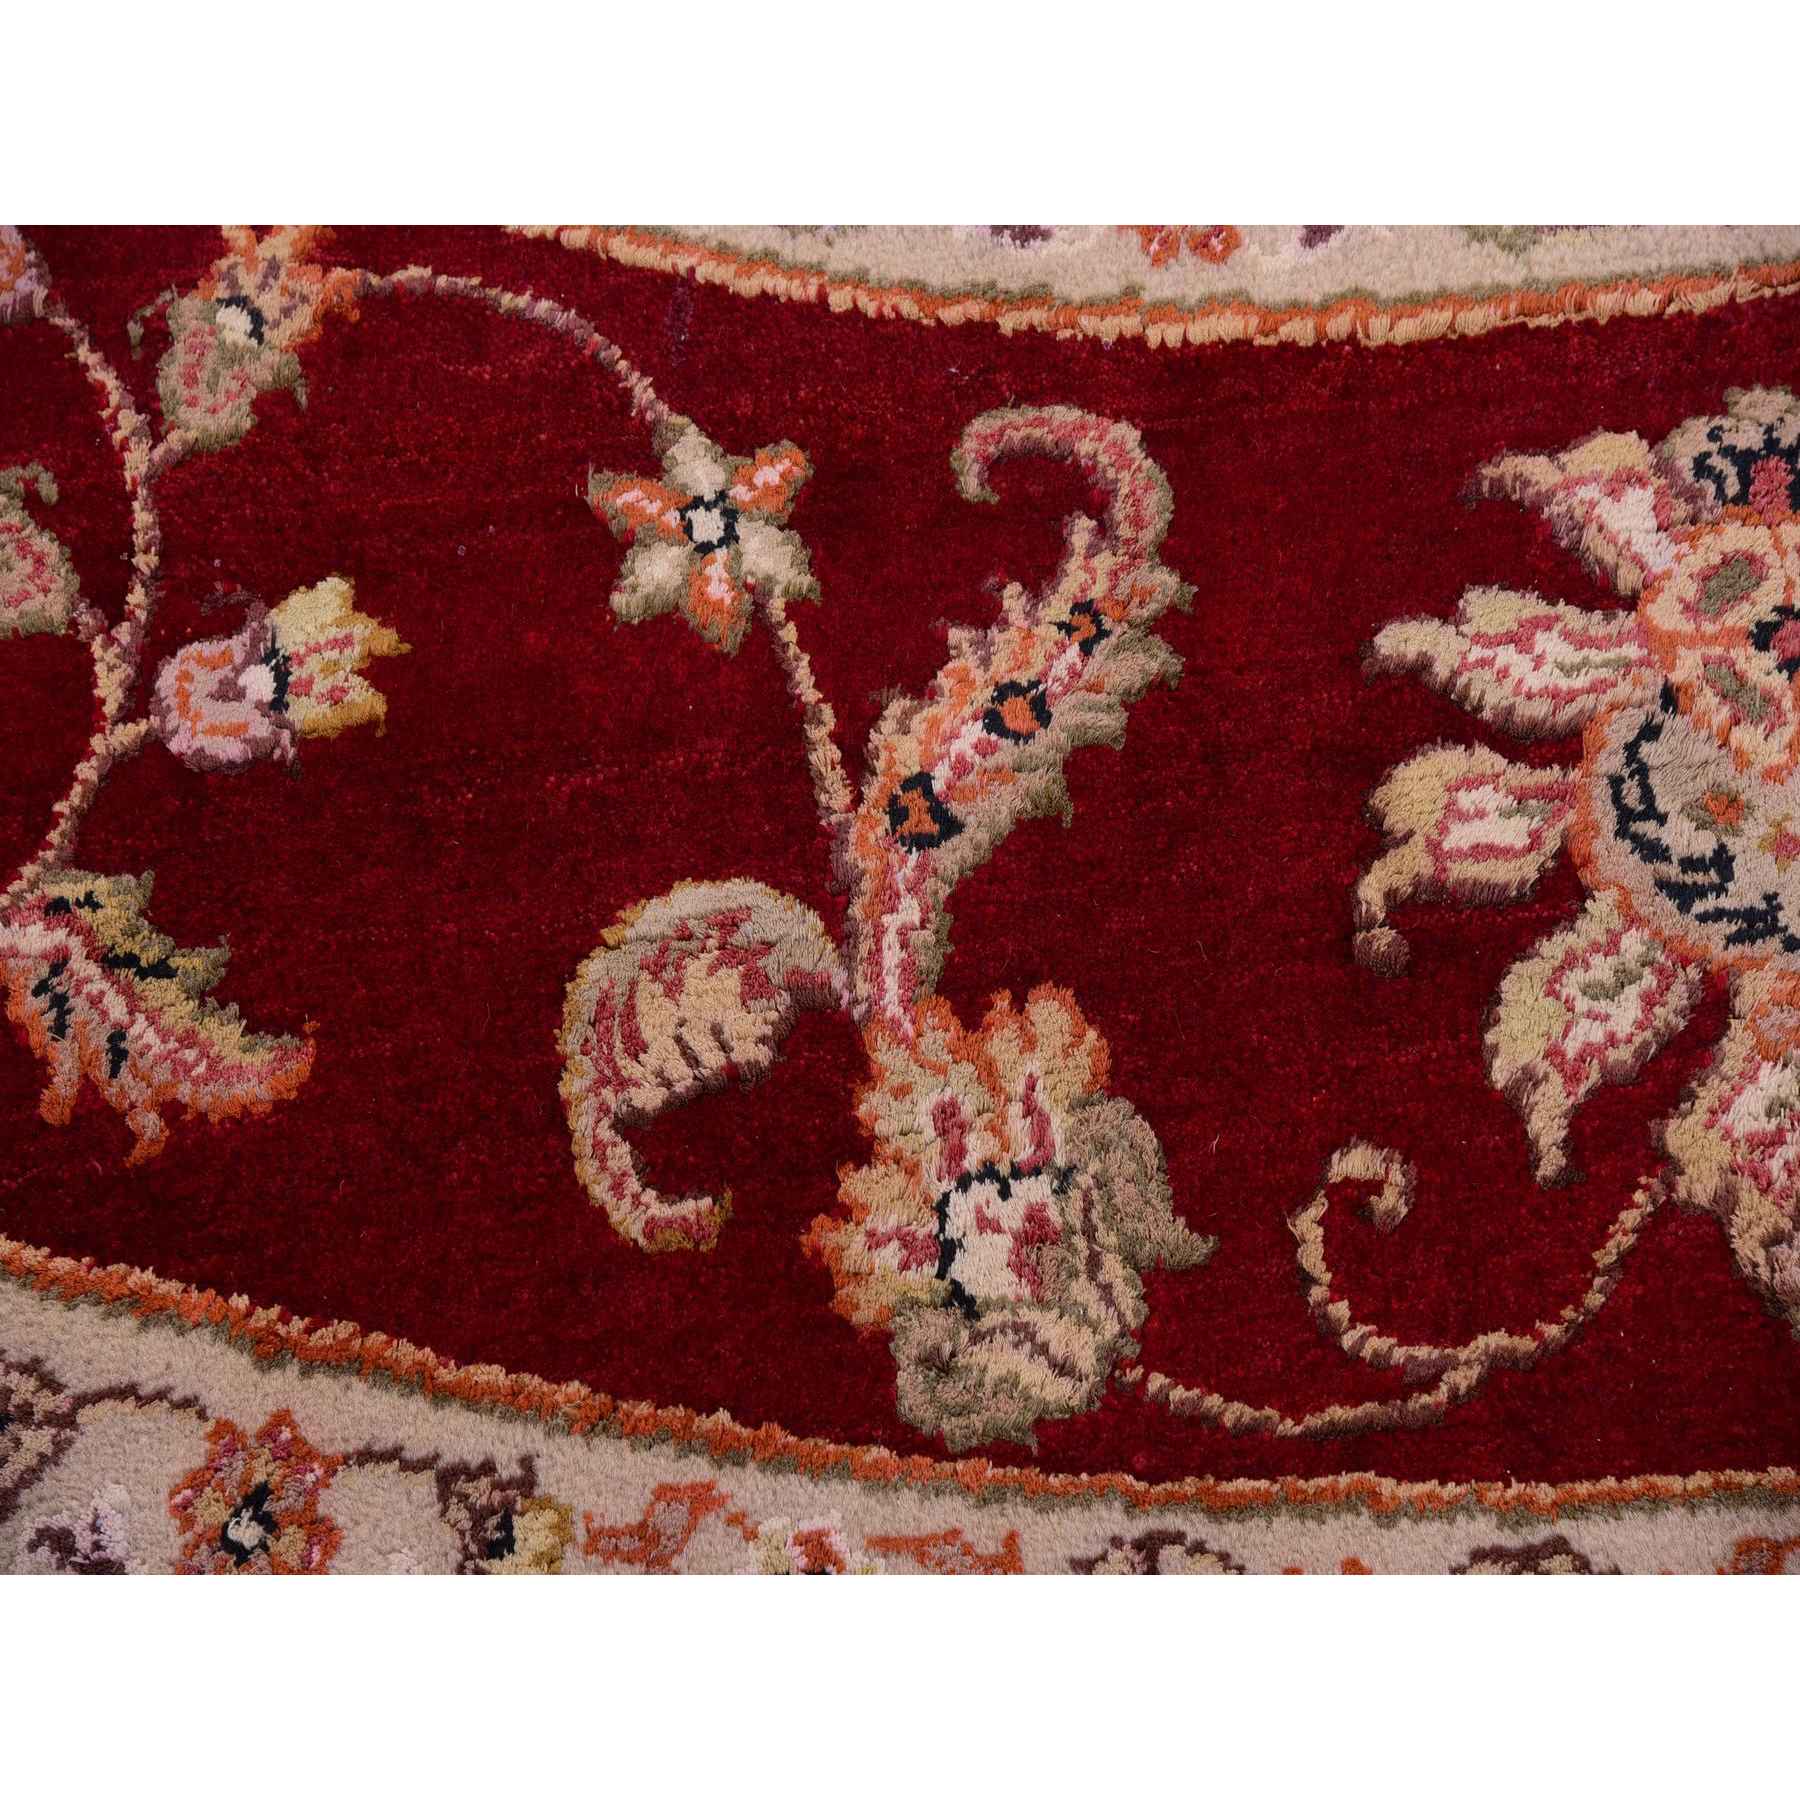 Rajasthan-Hand-Knotted-Rug-376790